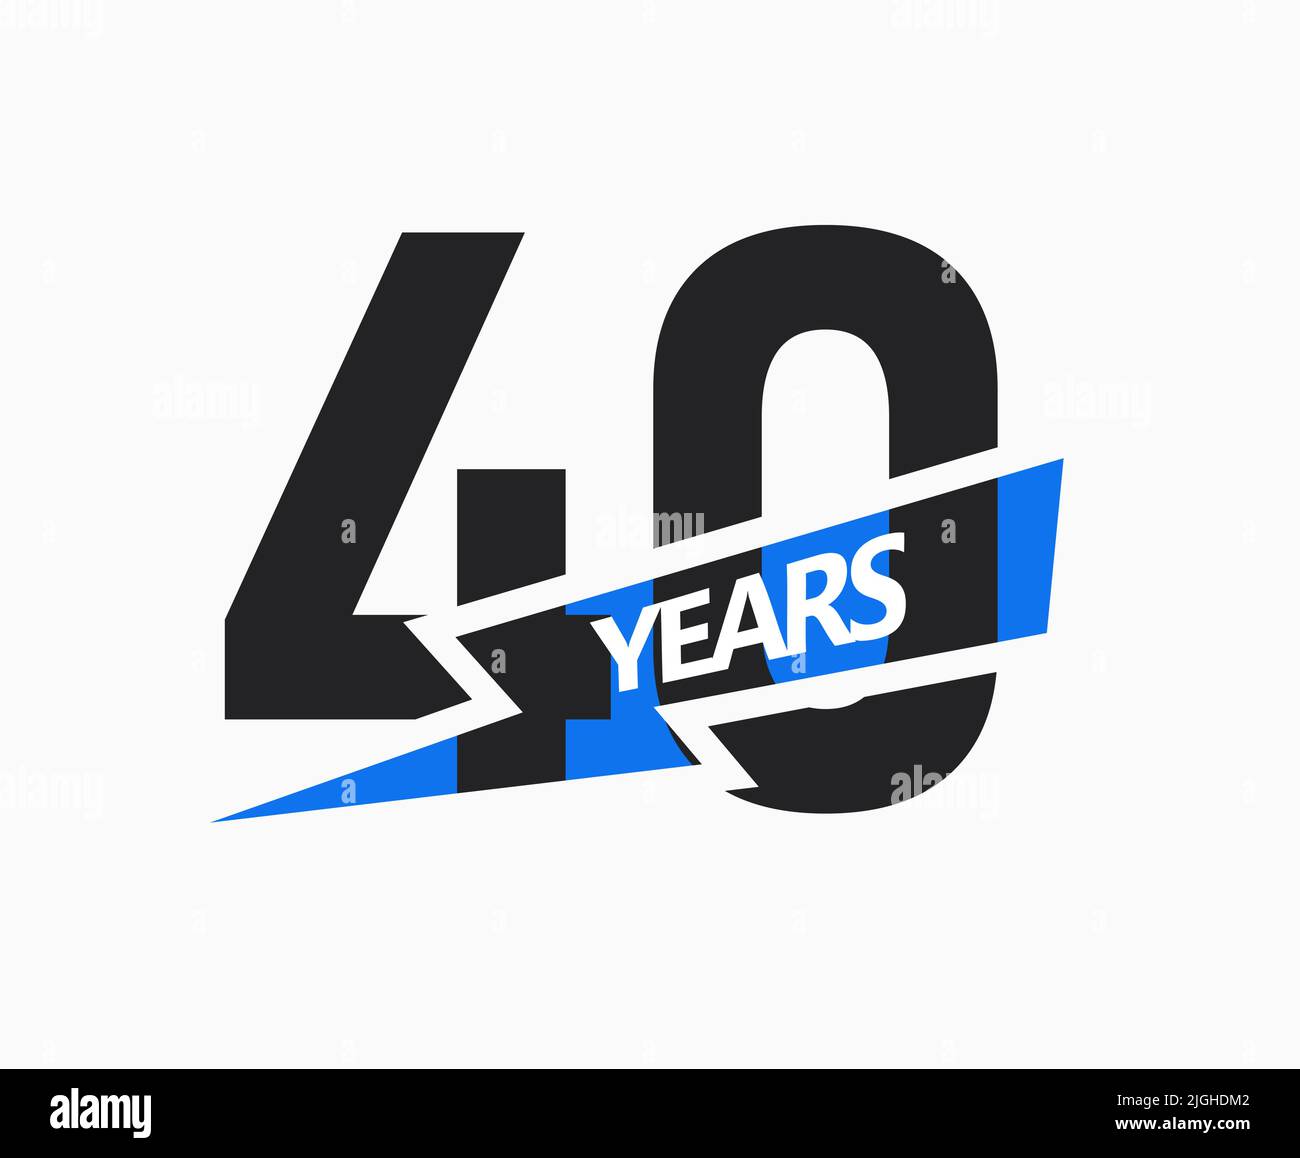 40 years of business, jubilee logo. 40th Anniversary sign. Modern graphic design for company birthday. Isolated vector illustration. Stock Vector